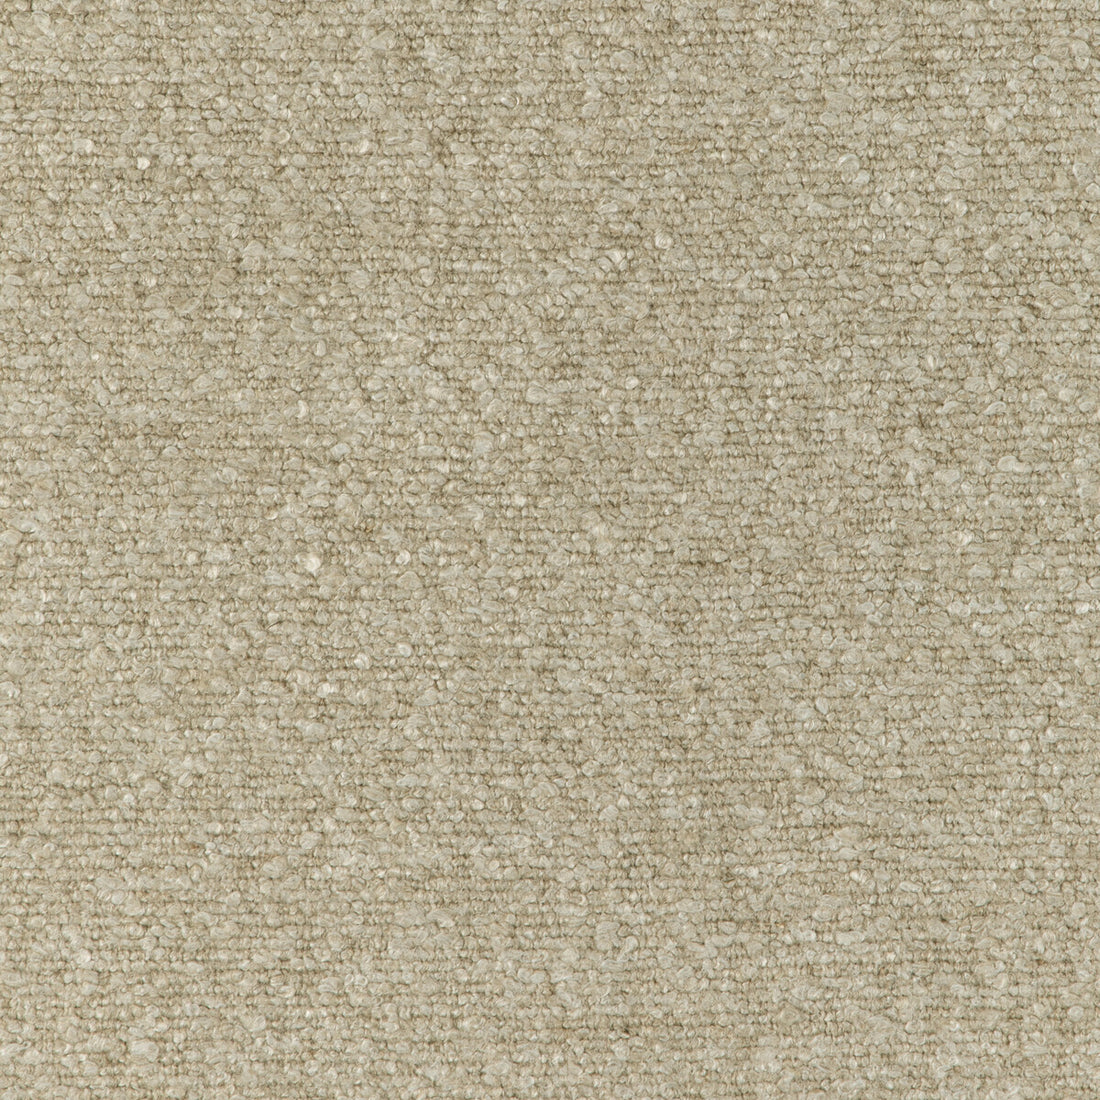 Linen Boucle fabric in flax color - pattern 36910.16.0 - by Kravet Couture in the Atelier Weaves collection